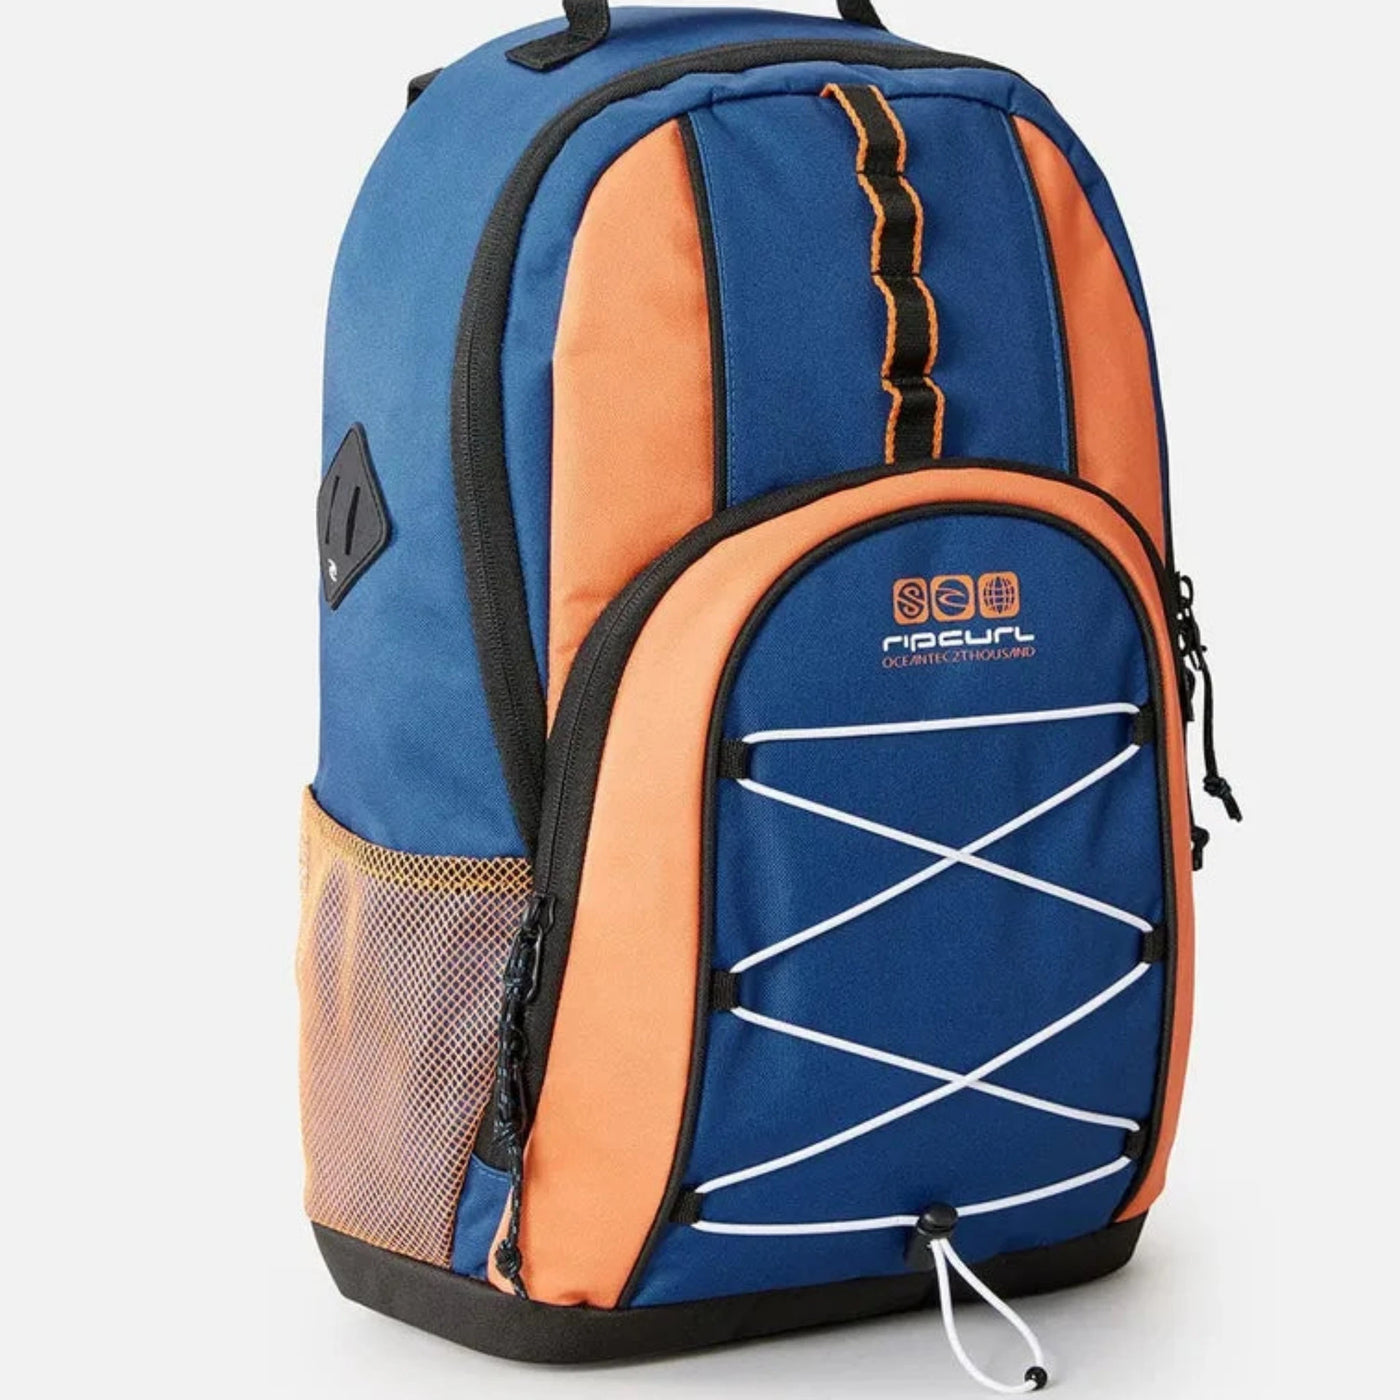 Rip Curl Trippin 20L Archive Backpack - Cobalt Navy